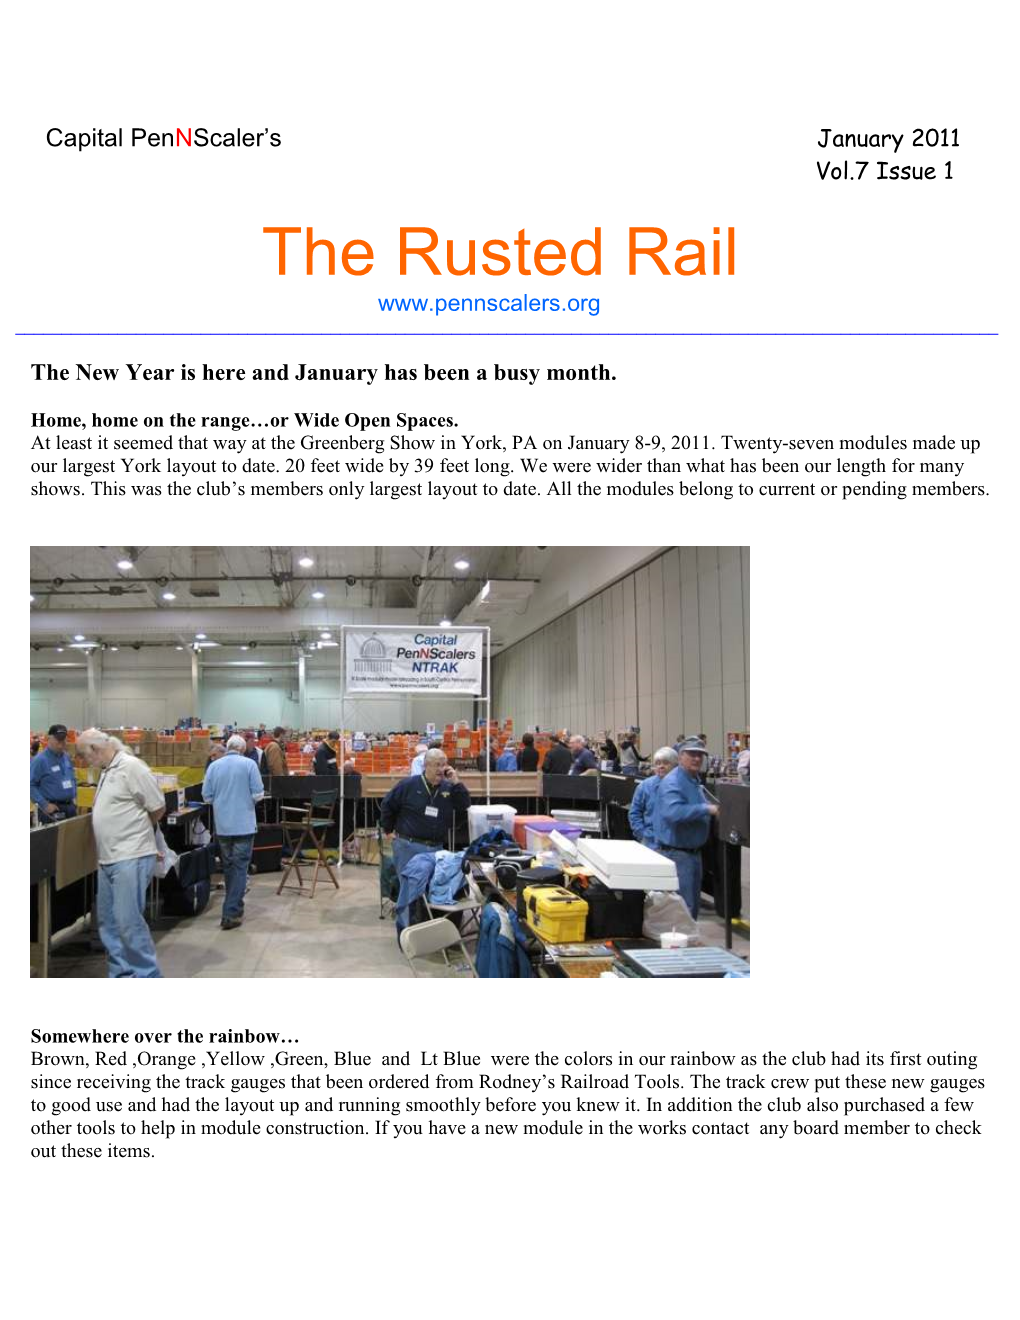 The Rusted Rail ______